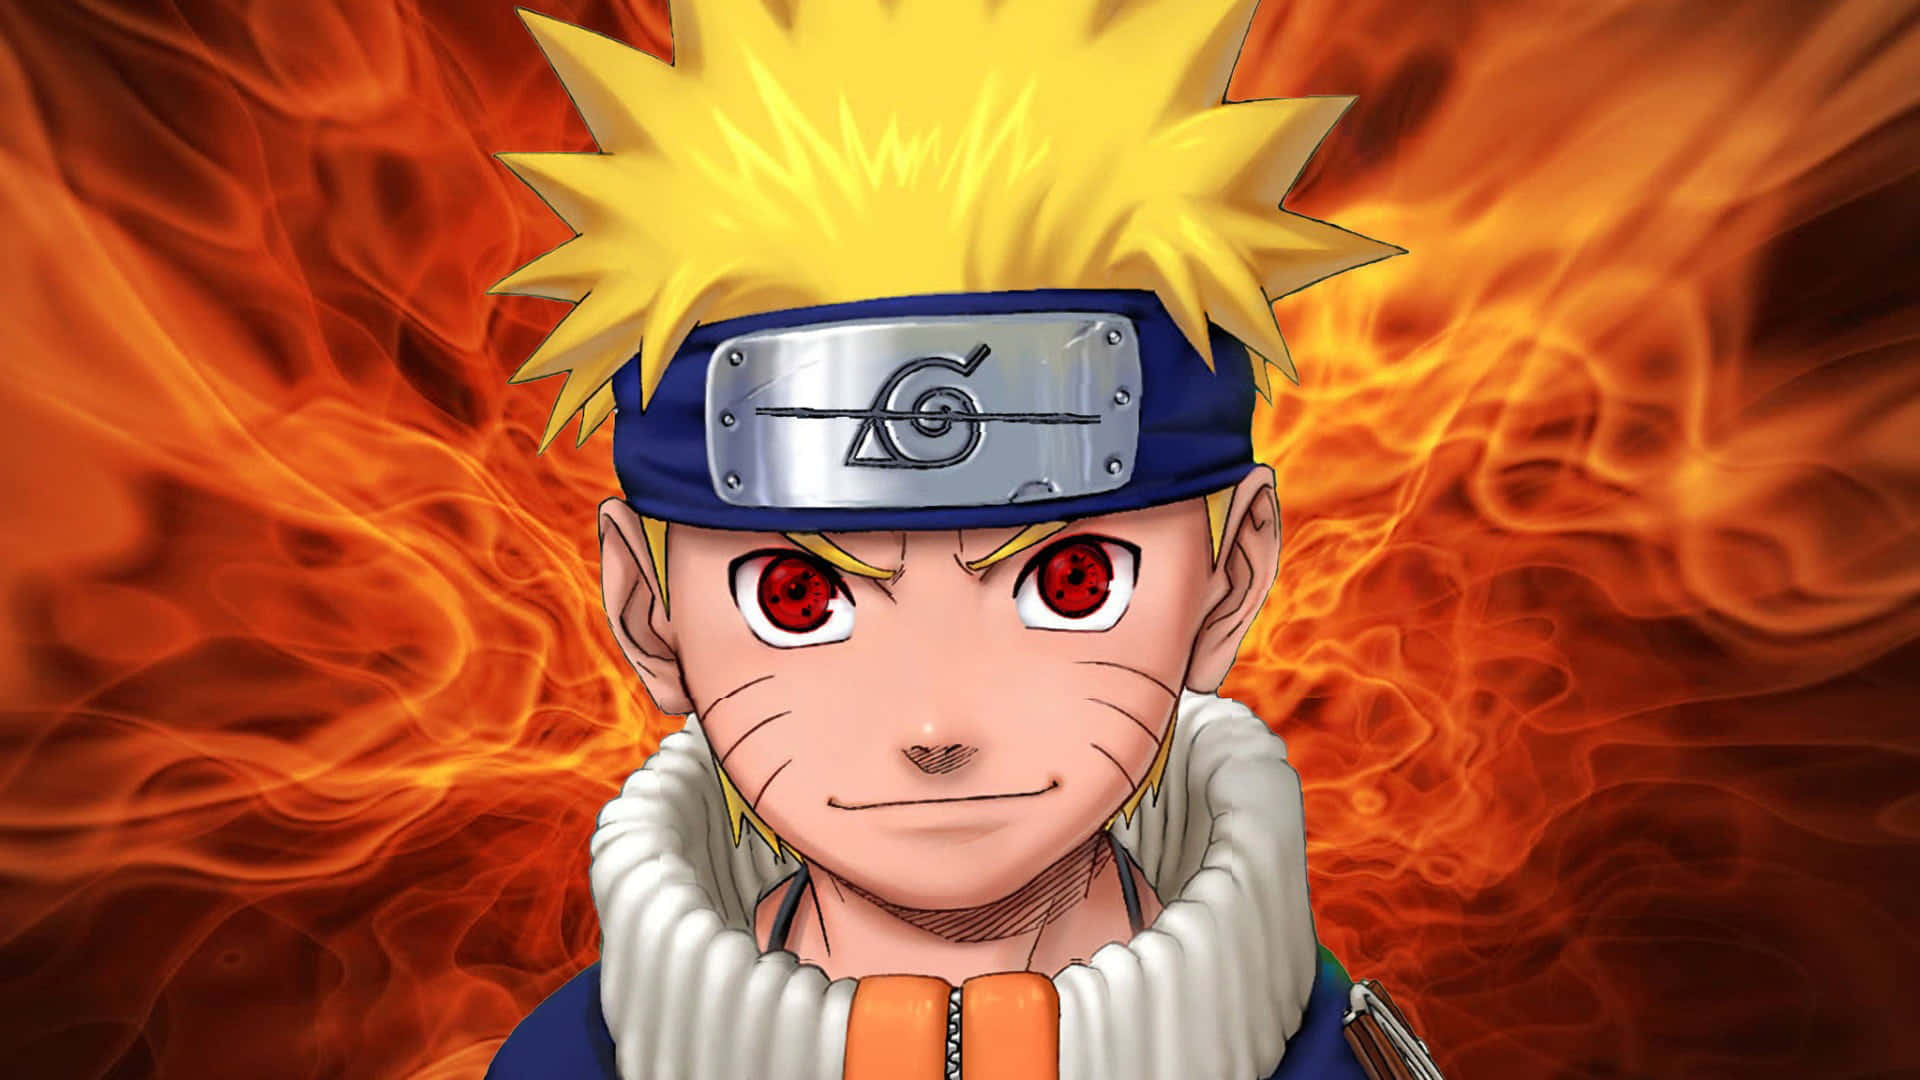 The Power of Fire: A Scorching Presence of Naruto Wallpaper